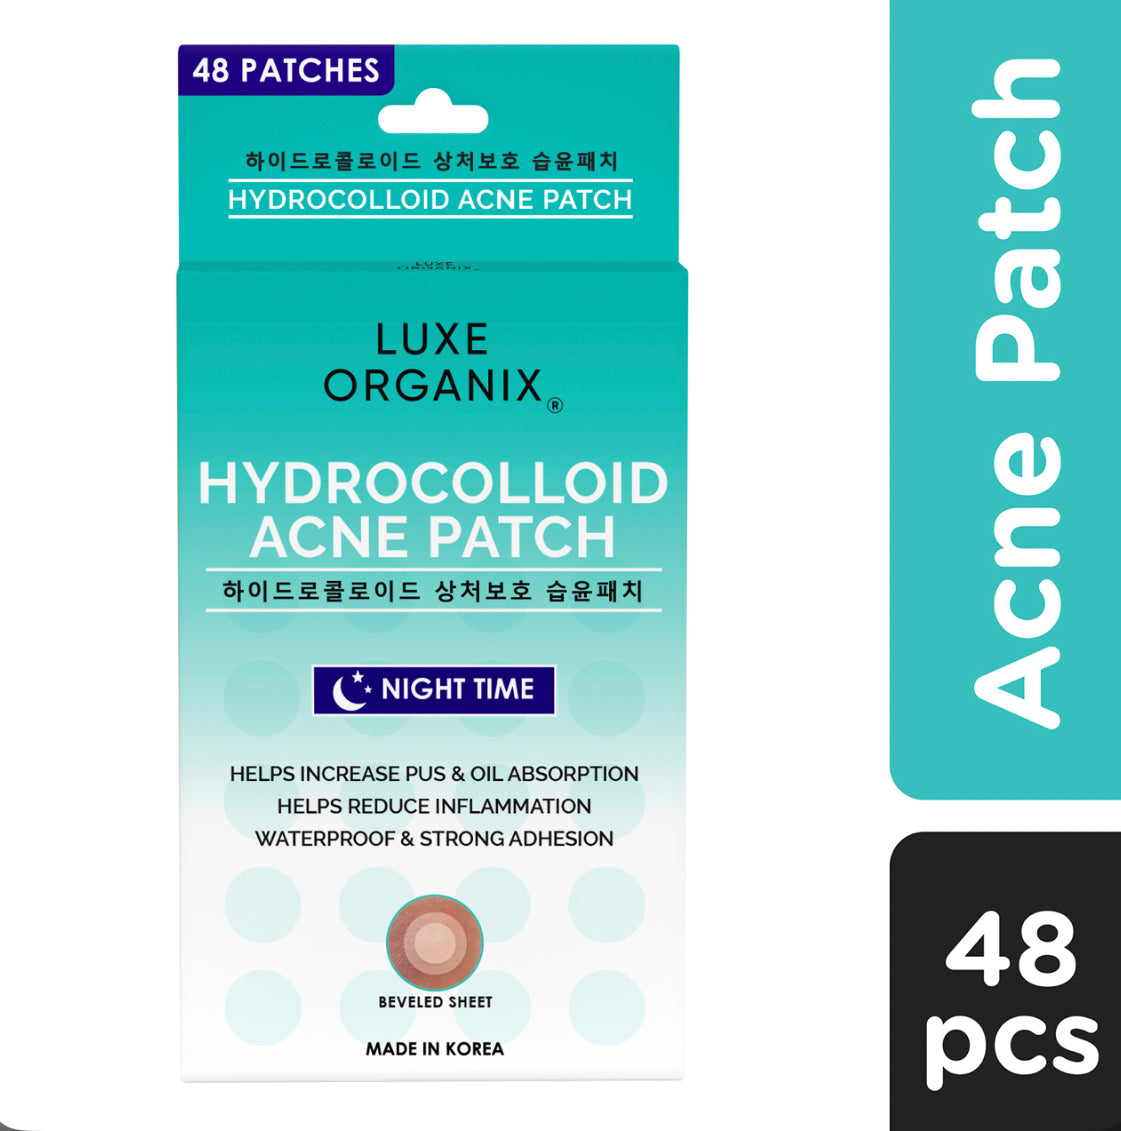 LUXE ORGANIX HYDROCOLLOID ACNE PATCH